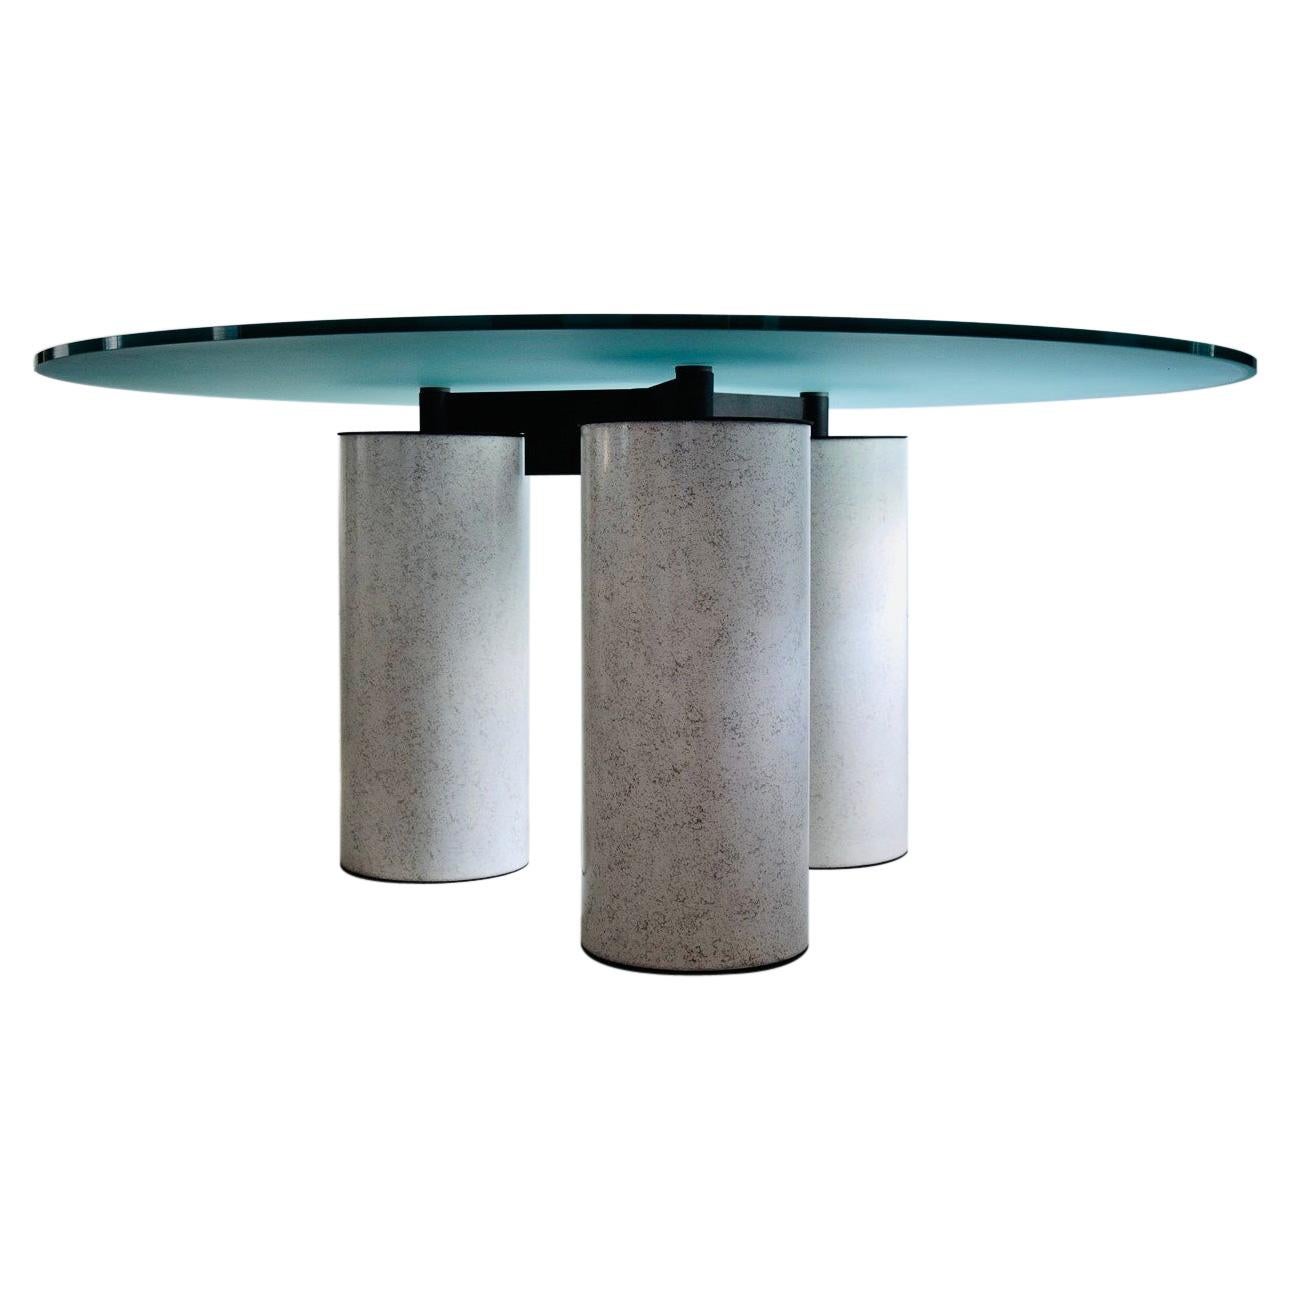 Postmodern Italian Round Glass Top Dining Table by Lella and Massimo Vignelli